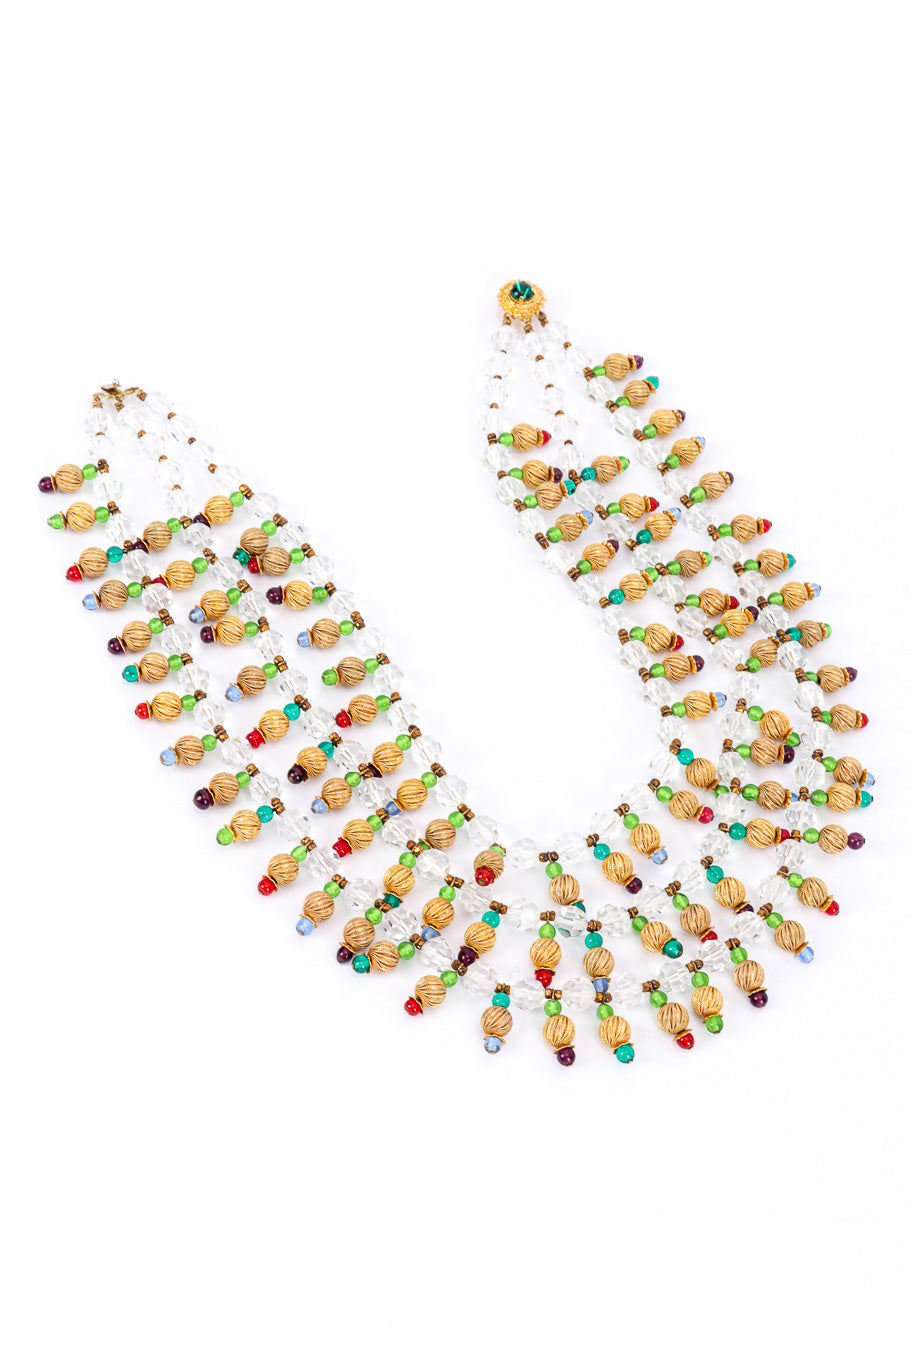 Vintage 3-Strand Beaded Necklace front view unclasped on a white backdrop @Recessla